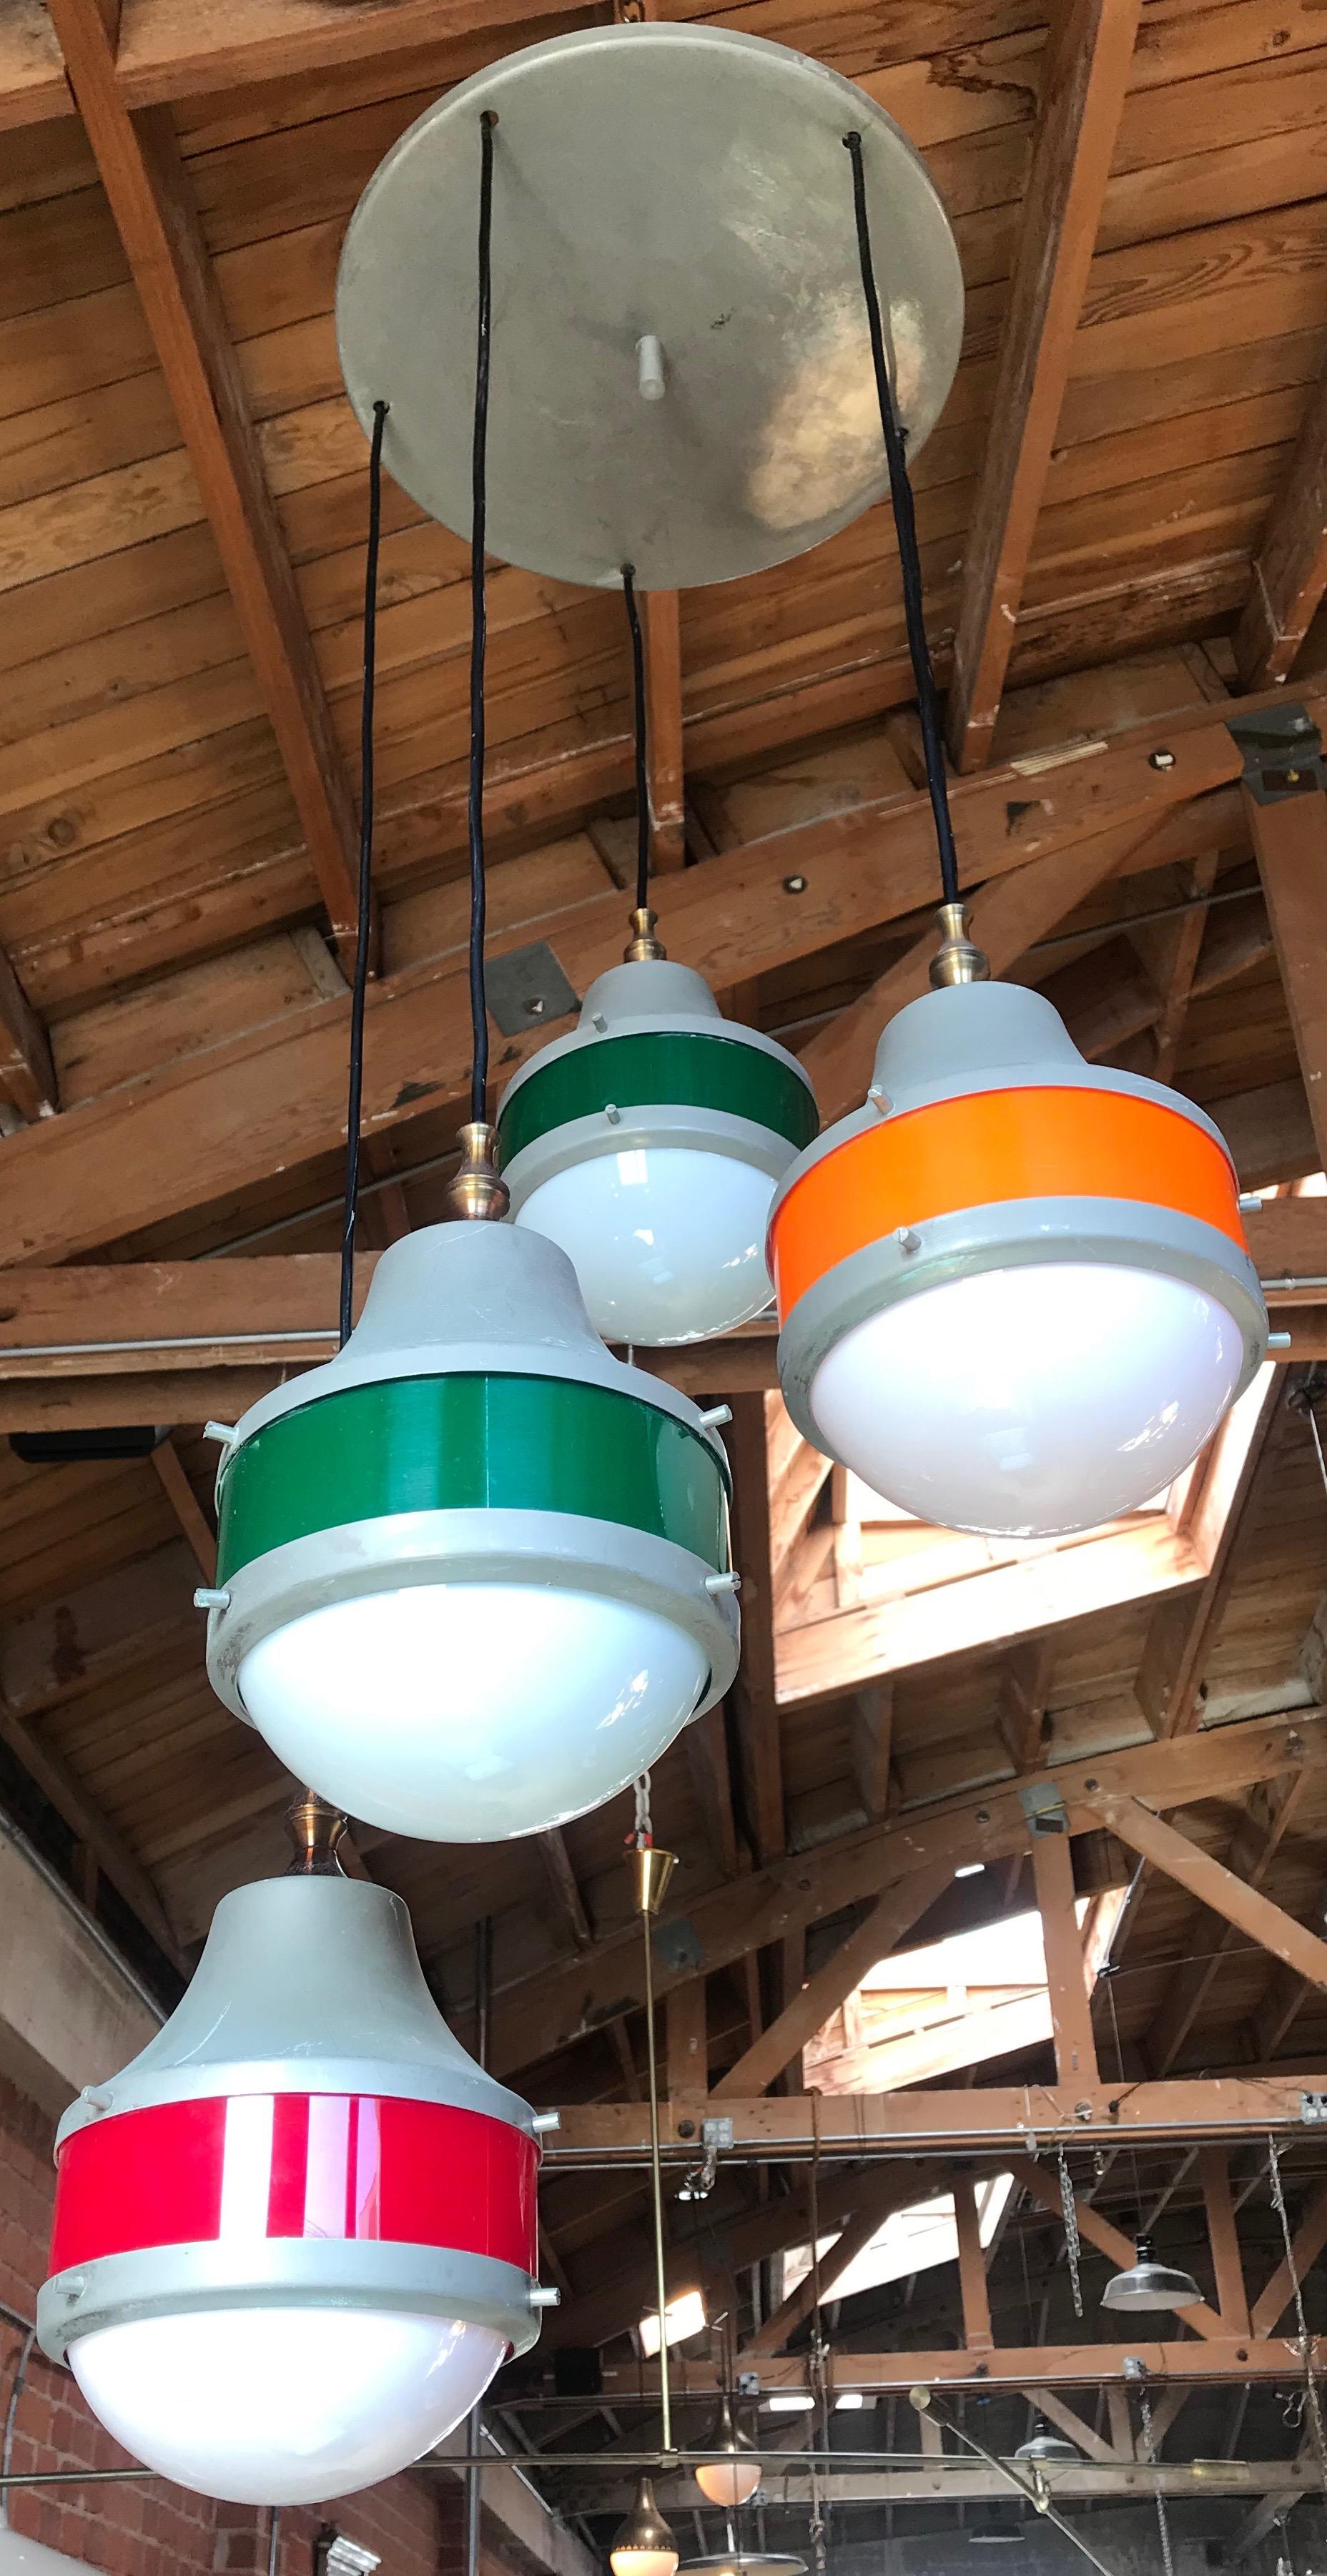 Stilux Milan Design: 1960s five lights in five different colors hanging chandelier in plexiglass
The height can be adjusted.